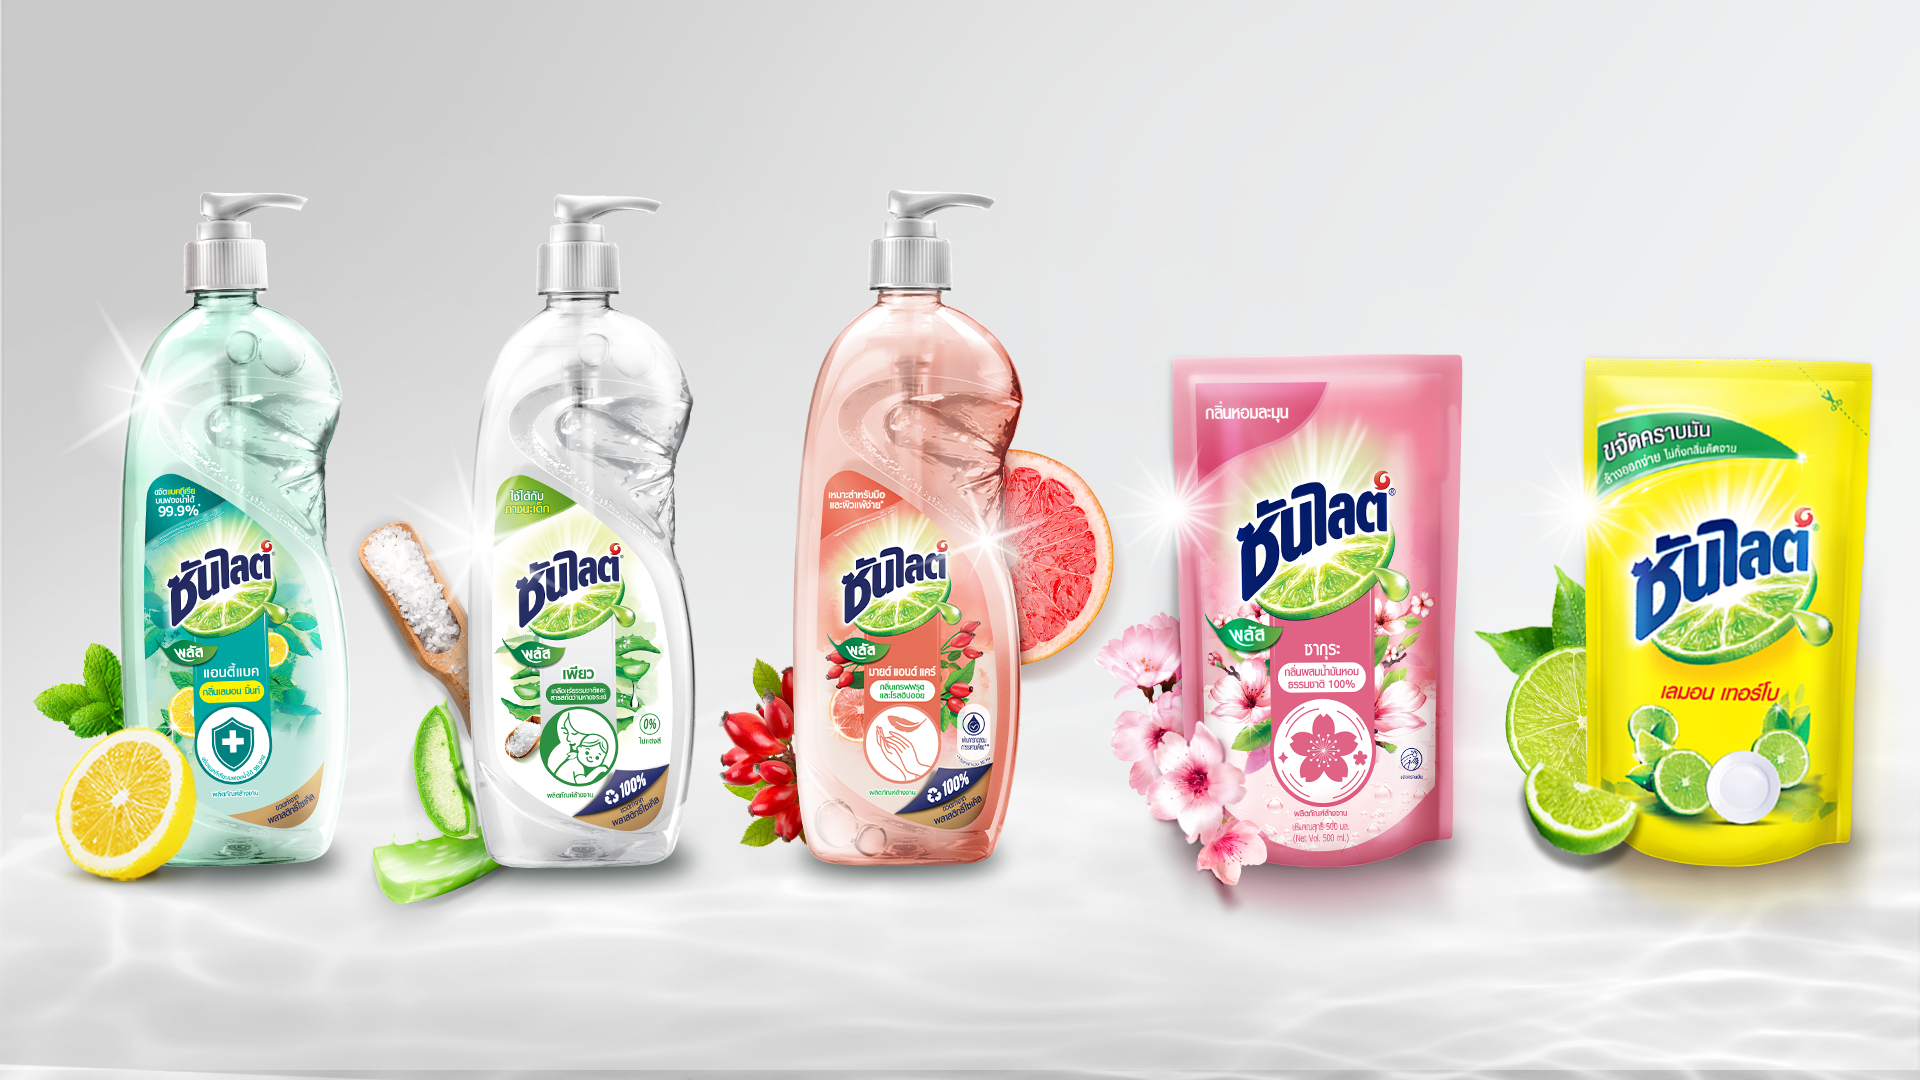 Sunlight dishwash variants in pouches and pump bottles with ingredients.